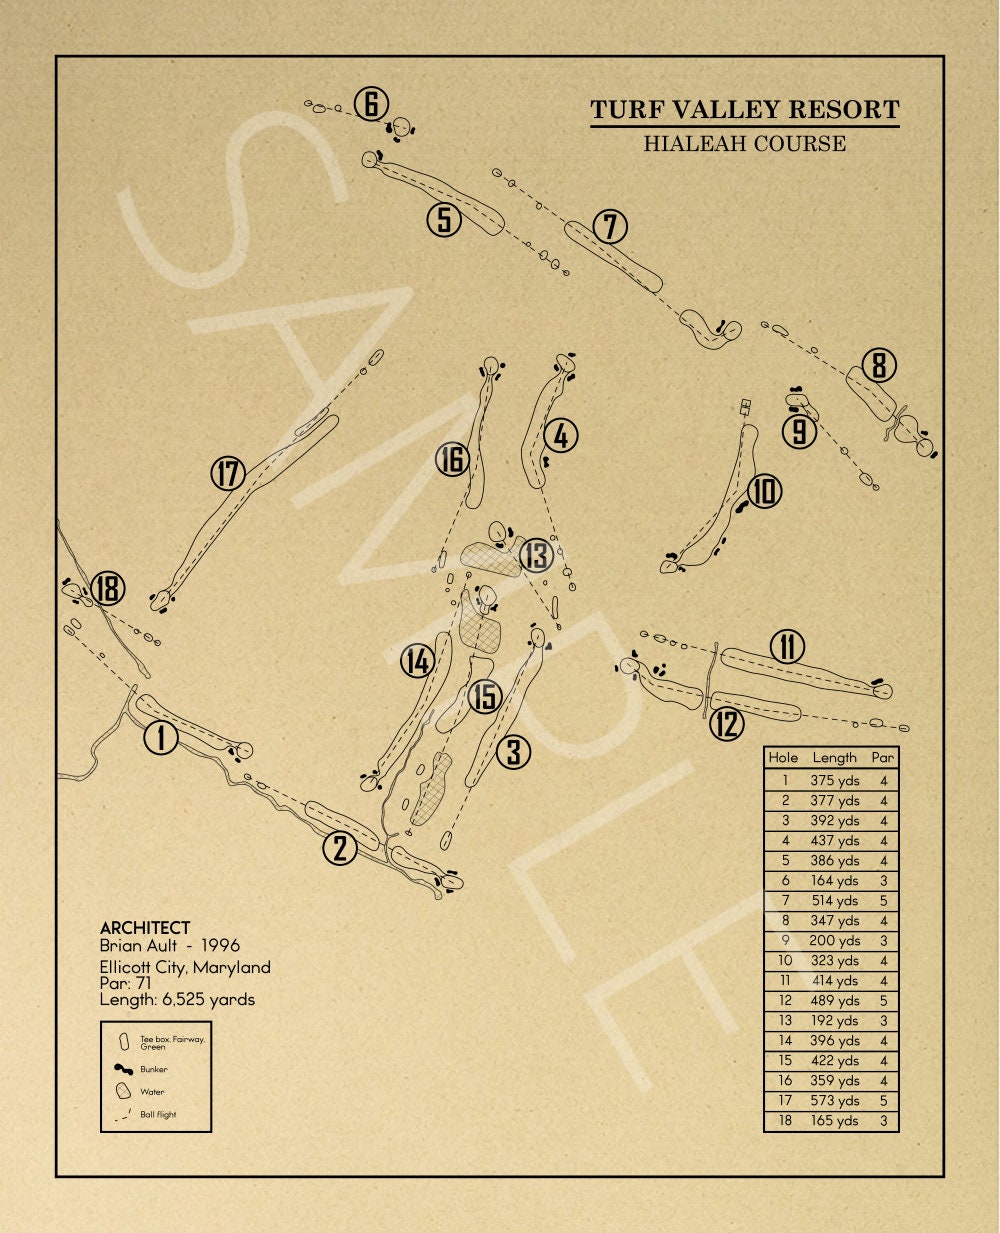 Turf Valley Resort Hialeah Course Outline (Print)